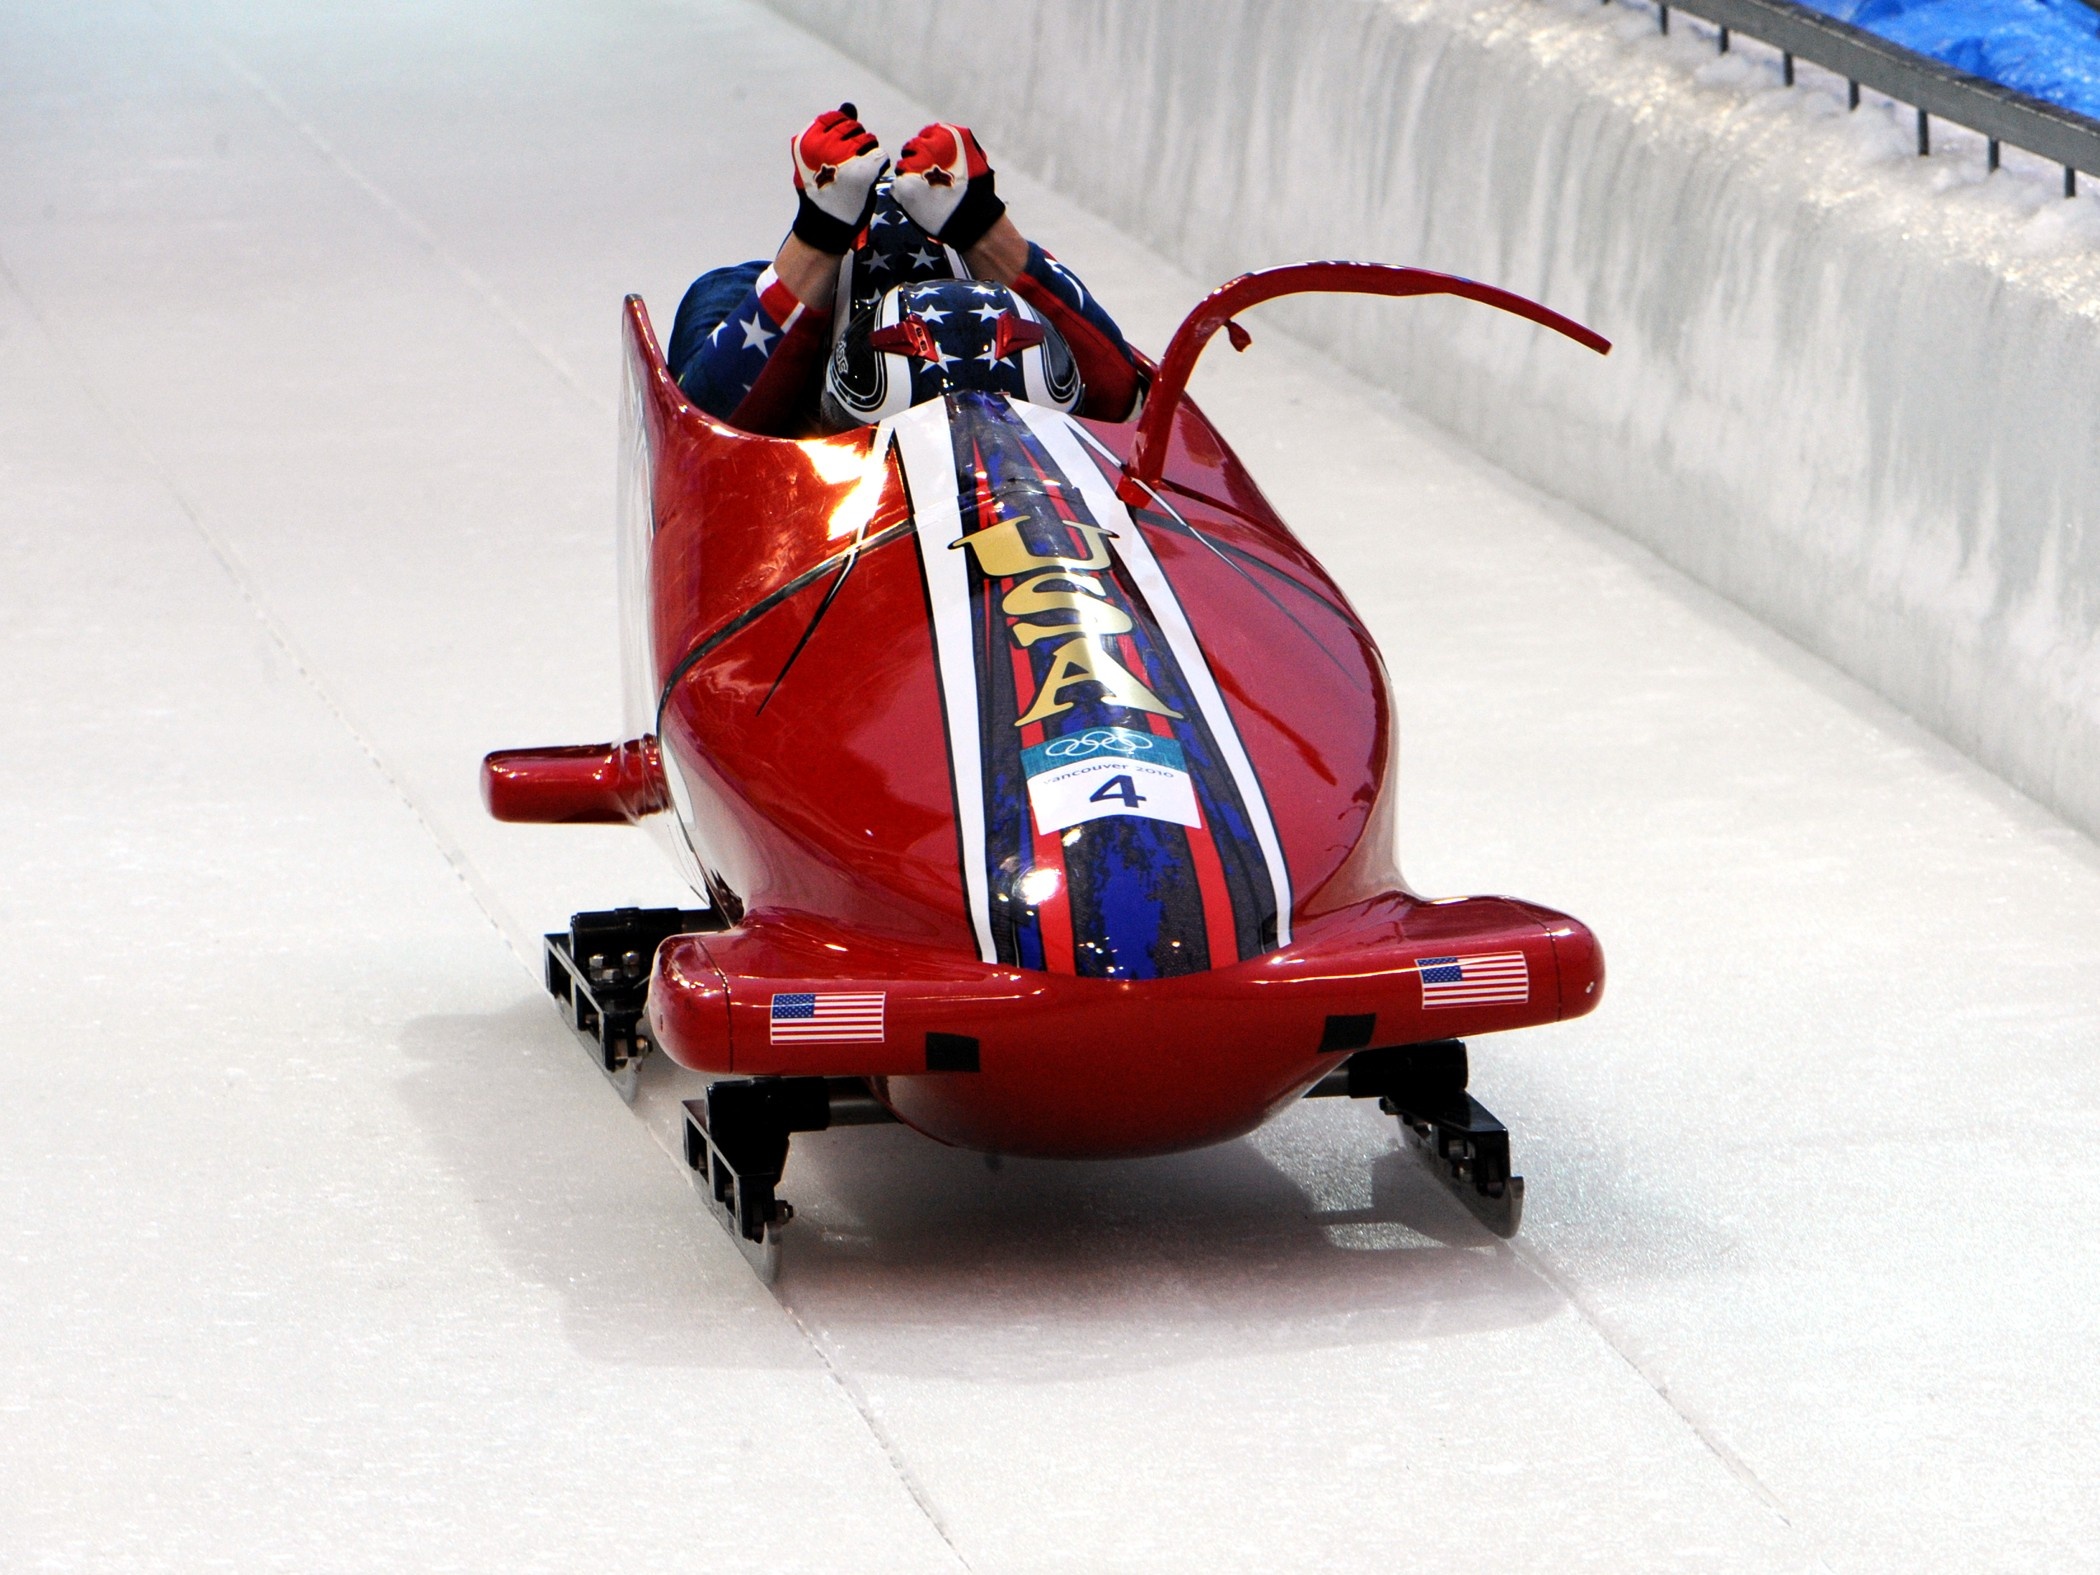 Bobsleigh: Michelle Rzepka and Shauna Rohbock during their third heat of the 2010 Olympic women's bobsled event. 2100x1580 HD Background.